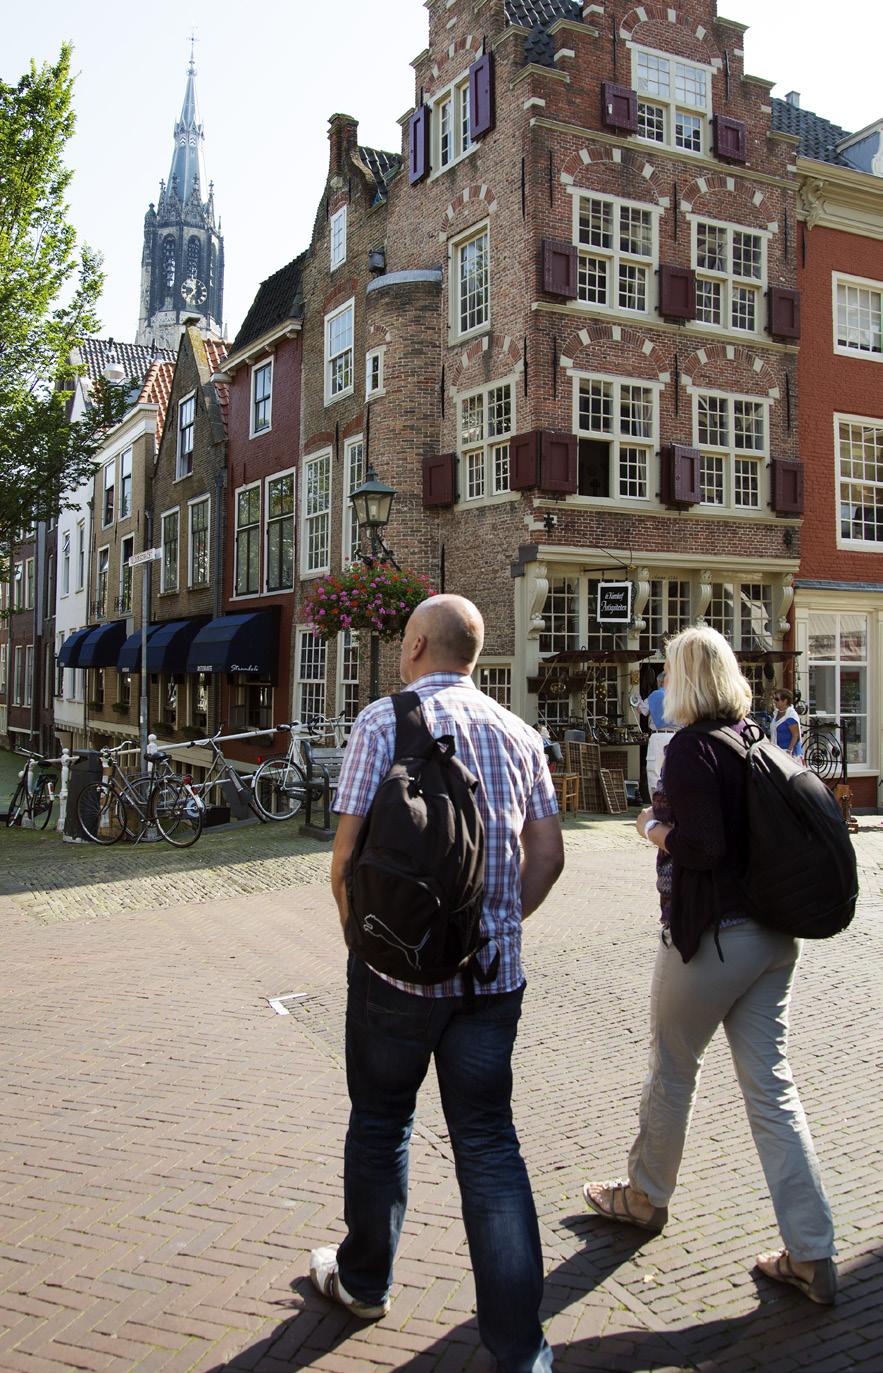 areas 14 canals in the city centre 1500 monuments CONGRES SERVICE DELFT We will be happy to advise and provide you with support you will need for organising an unforgettable congress in Delft